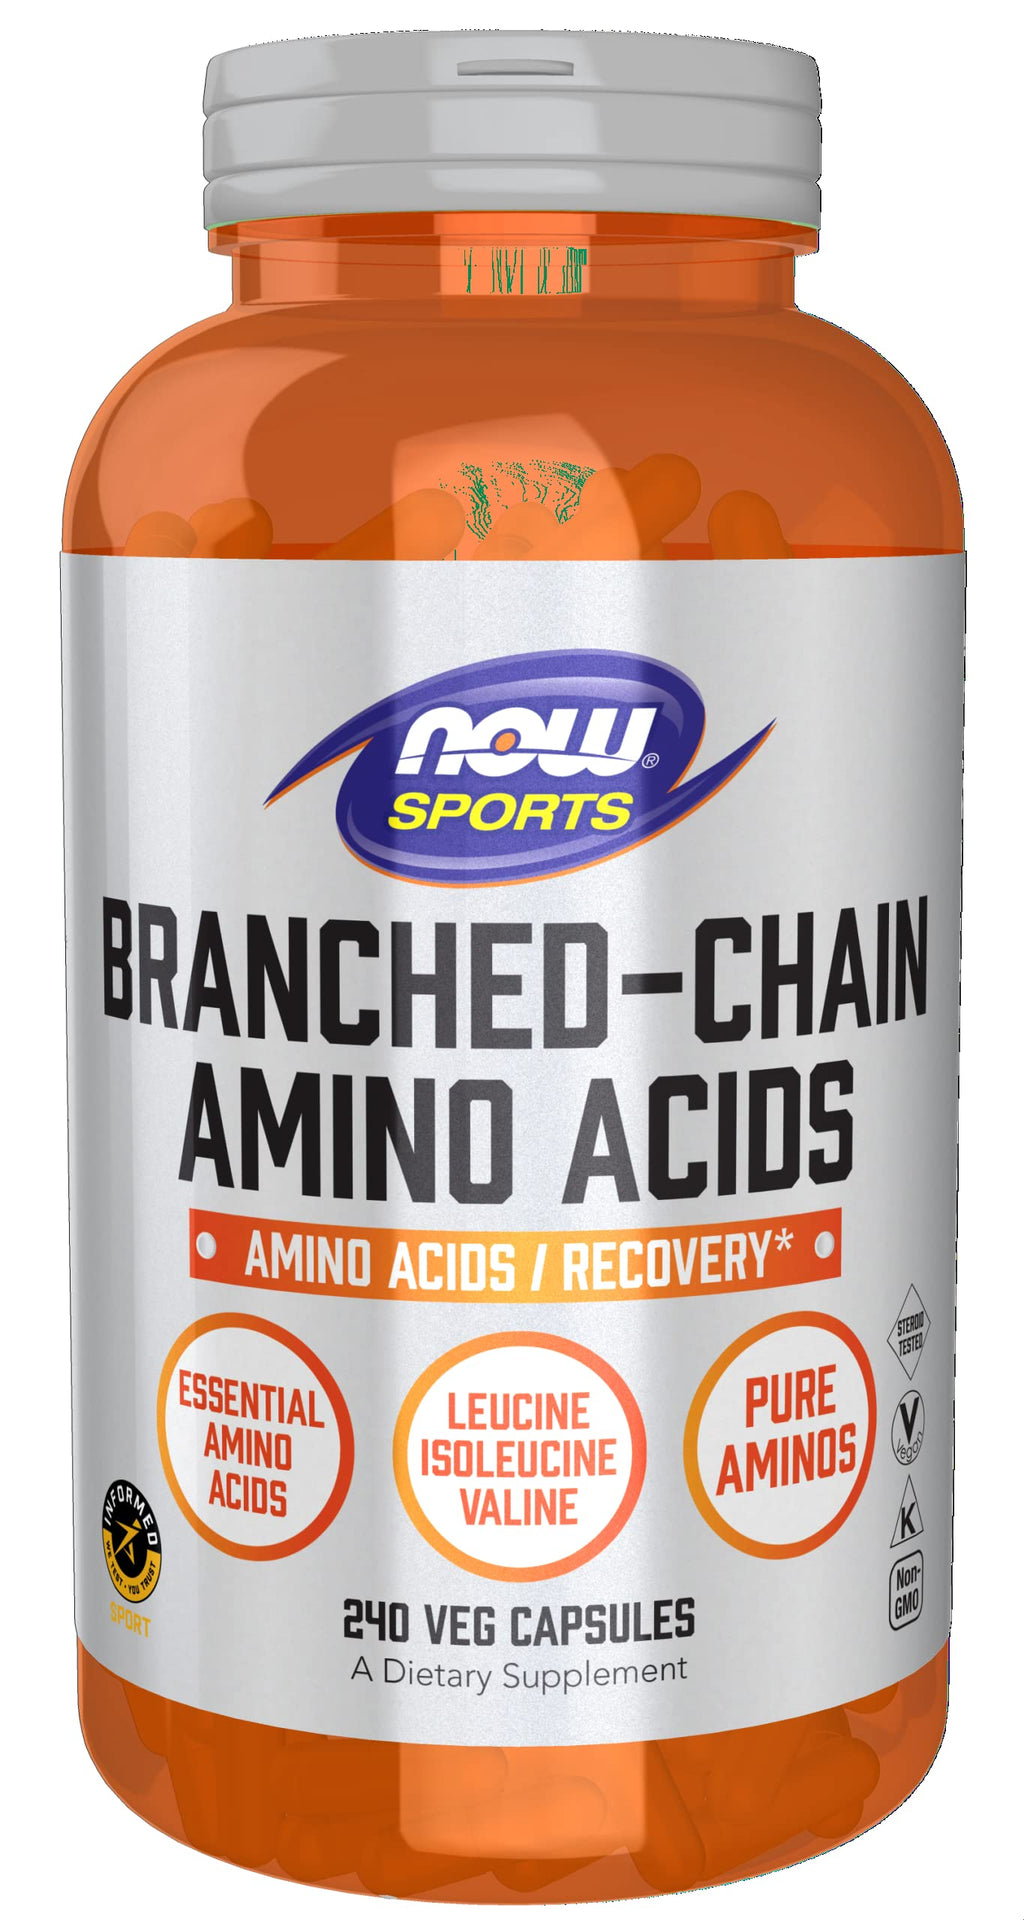 [Australia] - NOW Sports Nutrition, Branched Chain Amino Acids, With Leucine, Isoleucine and Valine, 240 Veg Capsules 